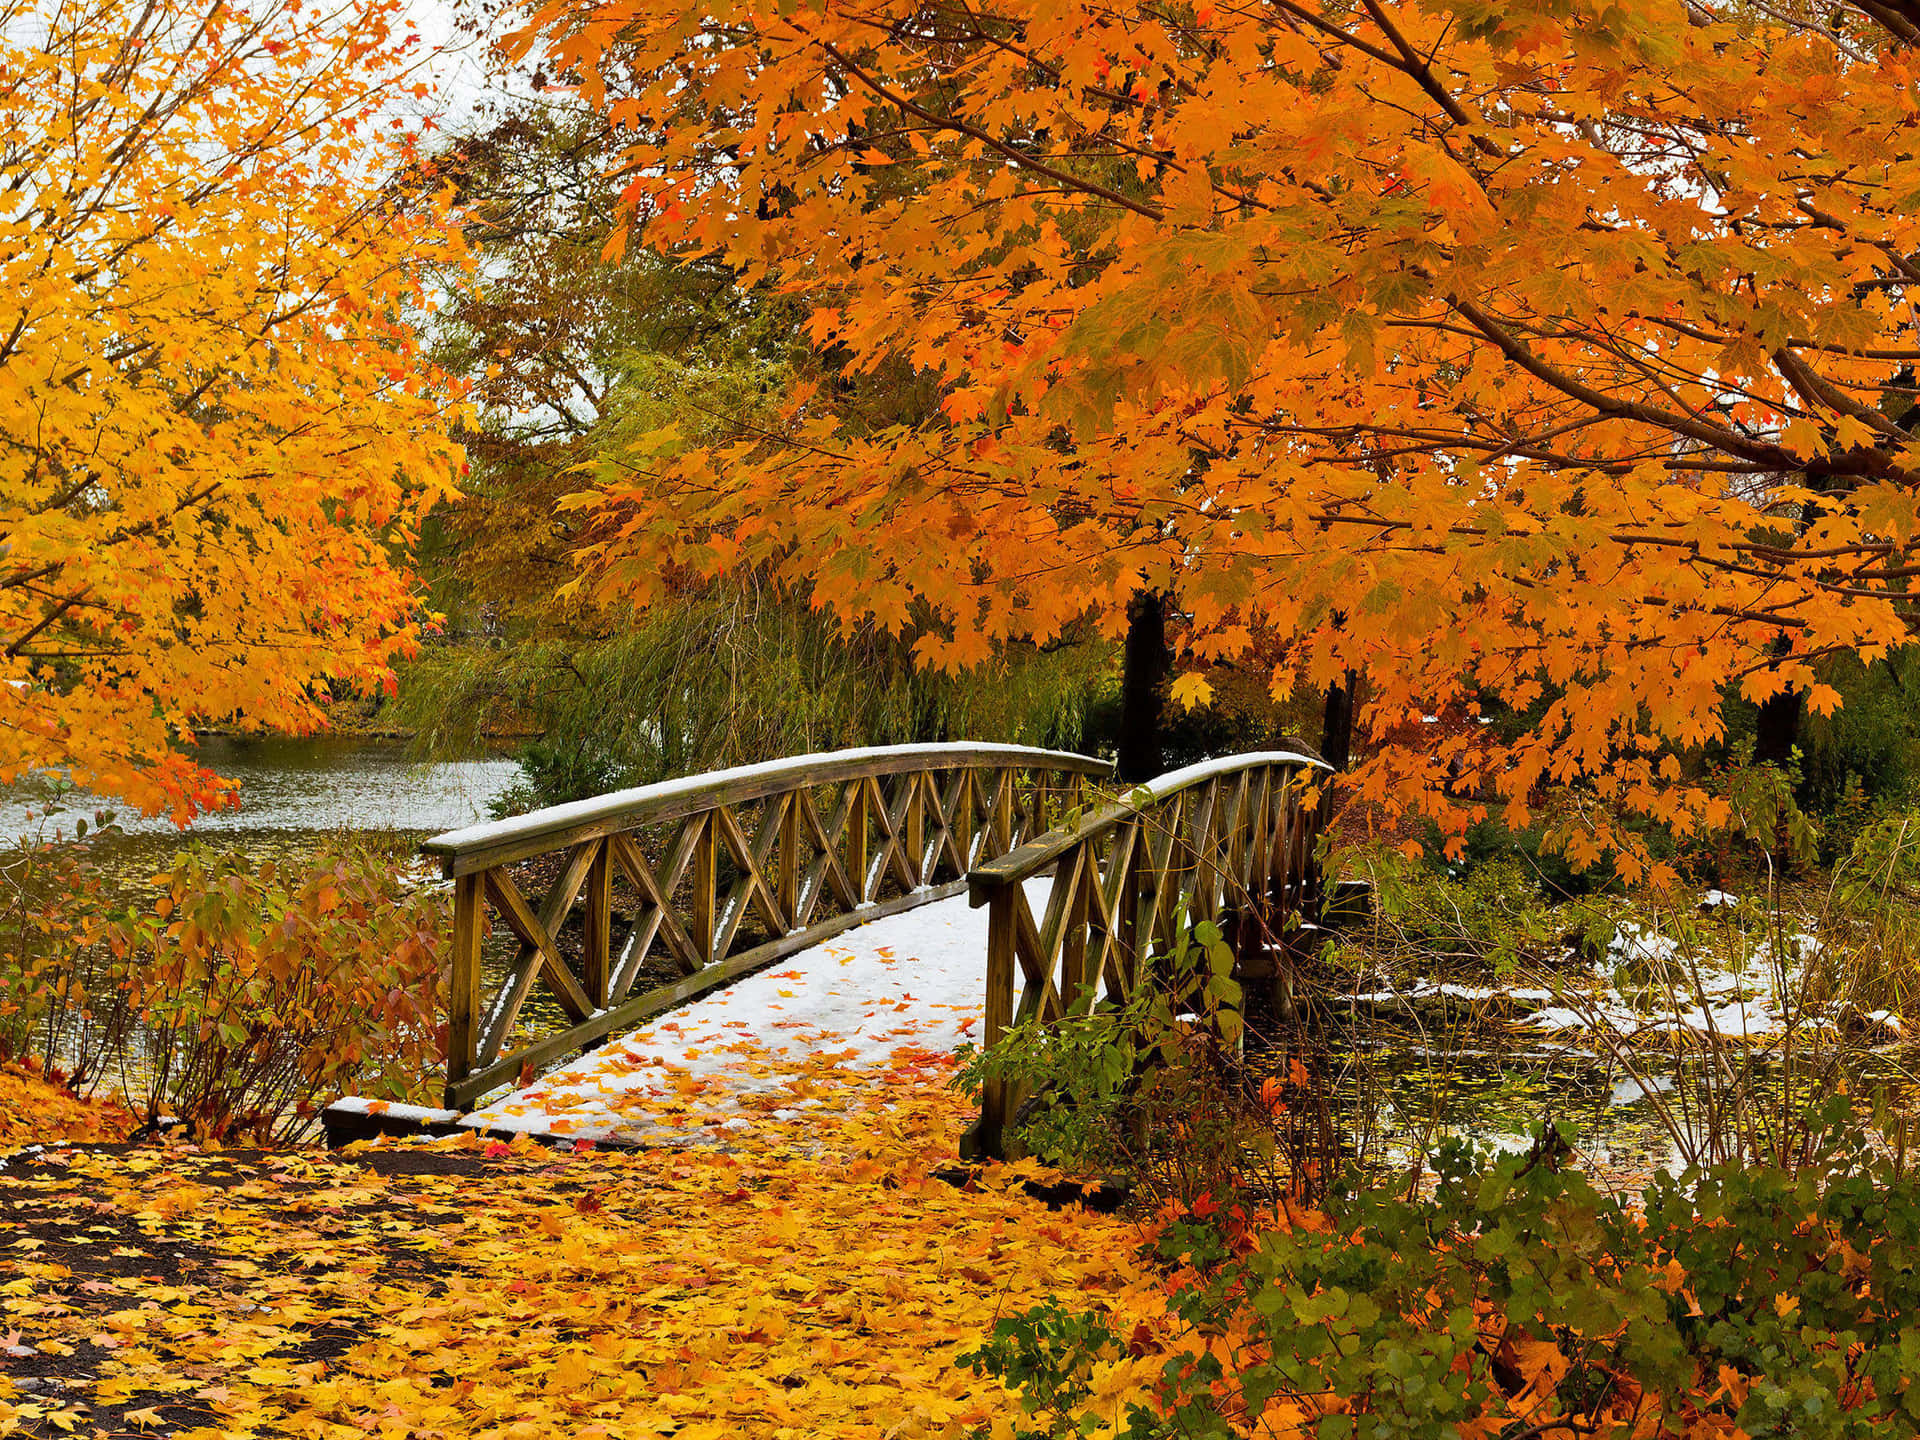 Enjoy the beauty of fall with a peaceful walk in the woods